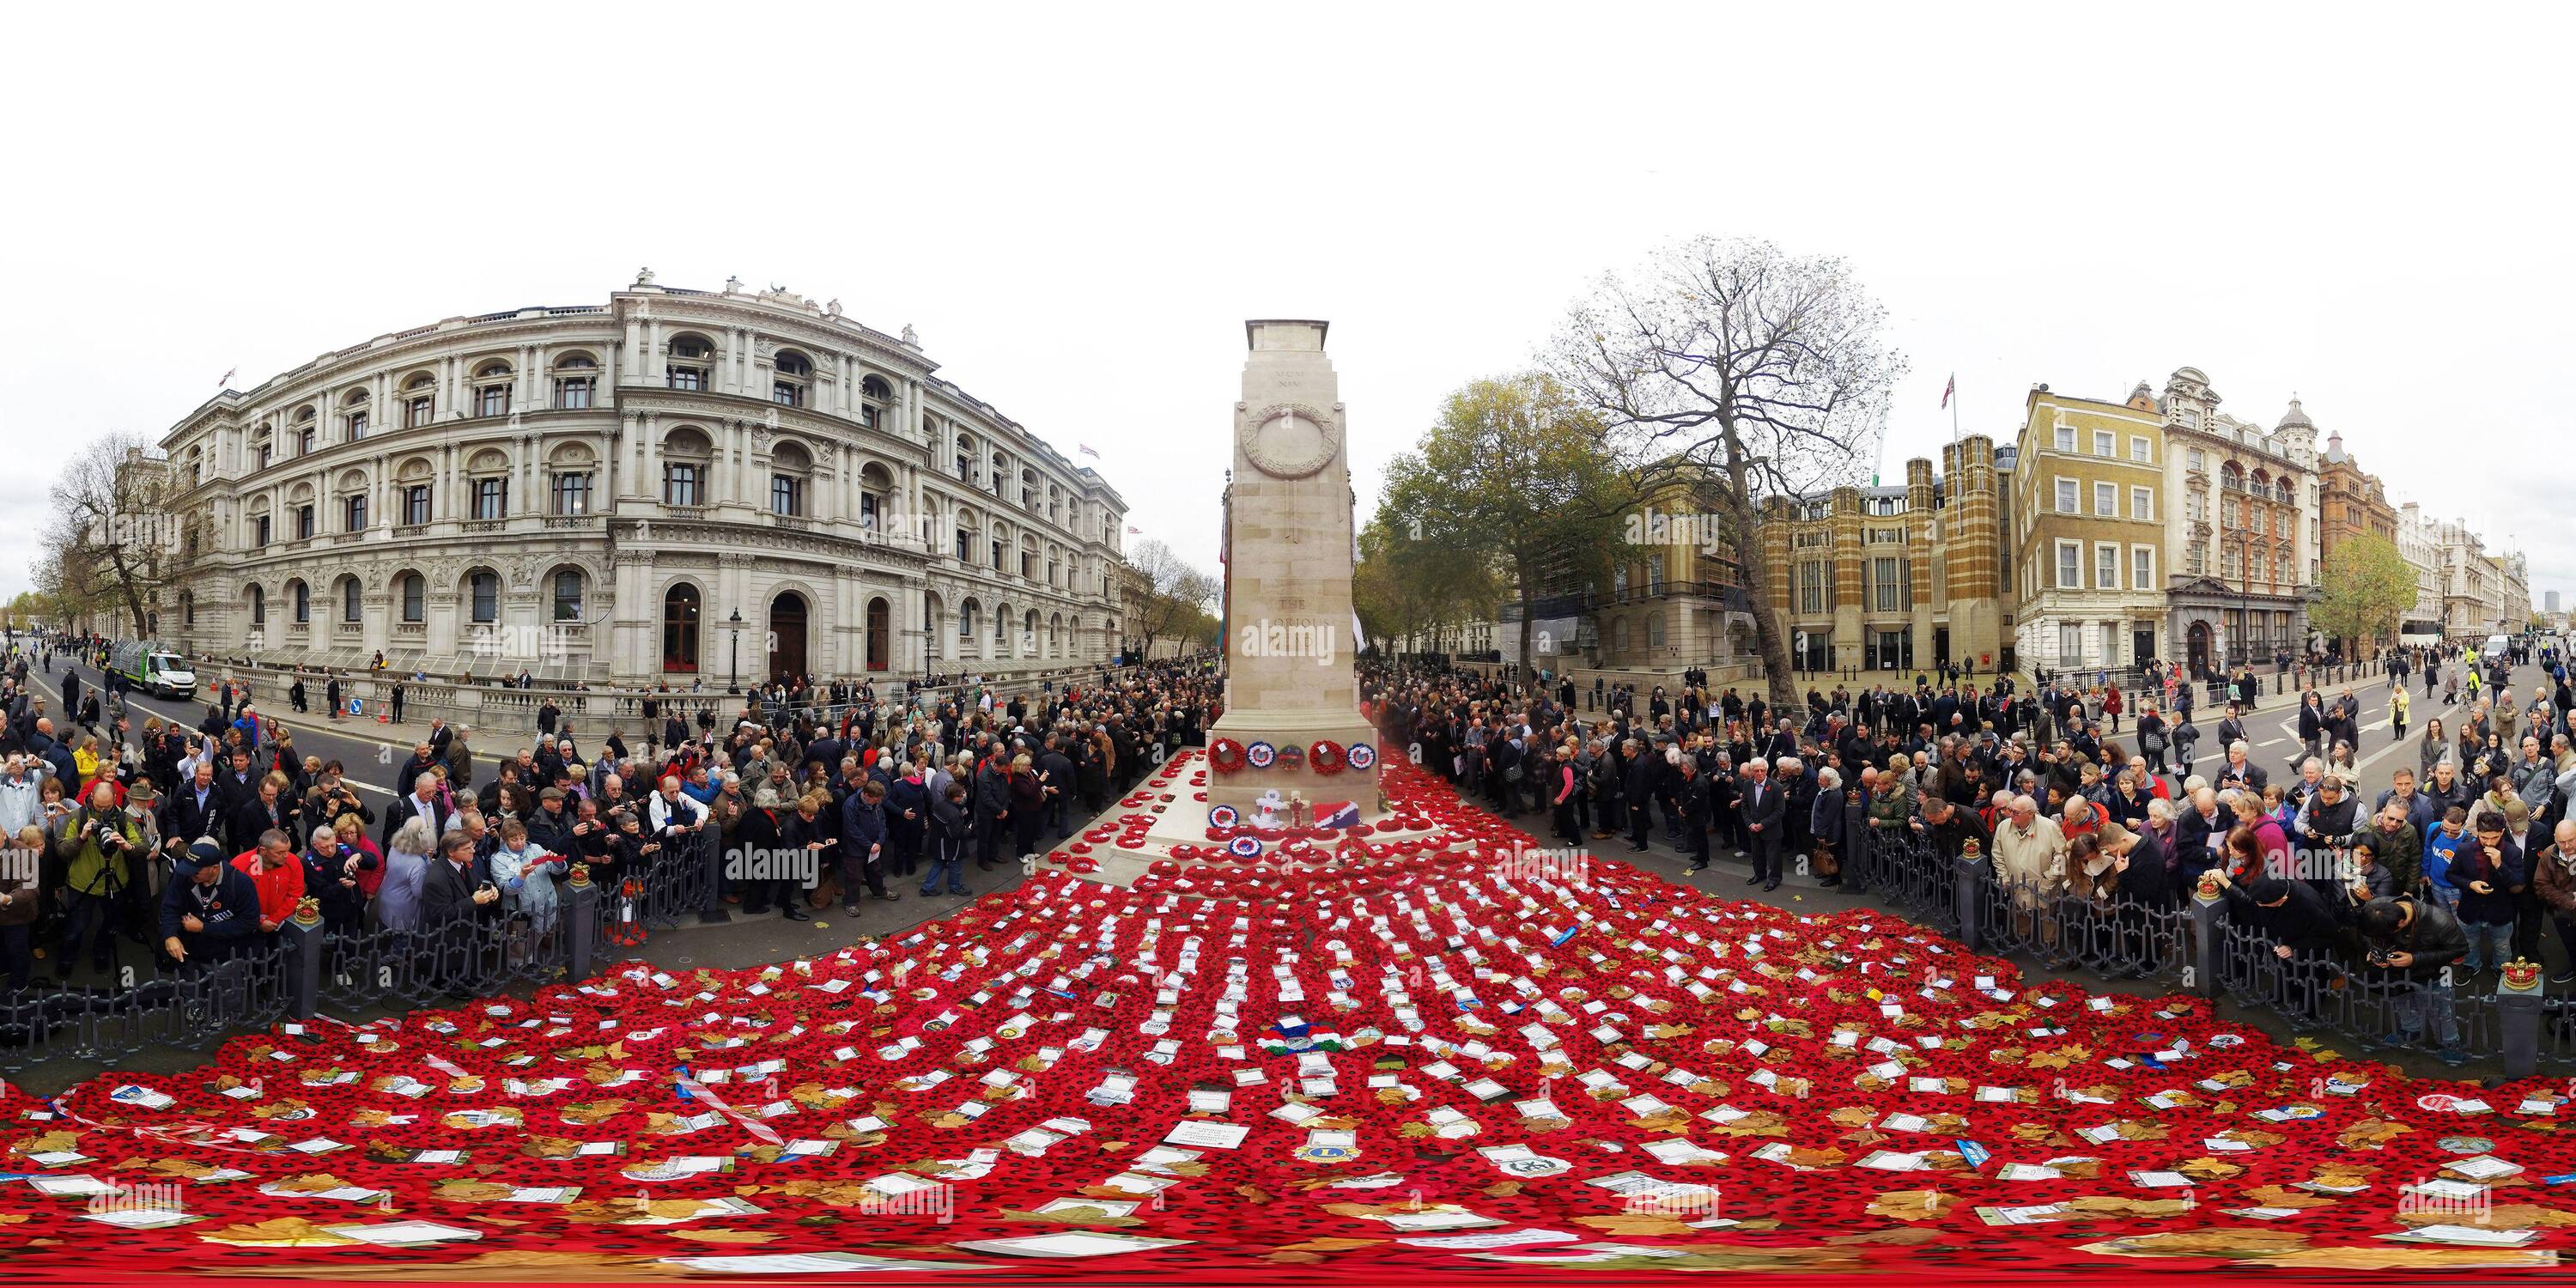 360 degree panoramic view of People gather around the Cenotaph in London shortly after 11am on Armistice Day. Copyright Picture : © MARK PAIN / ALAMY